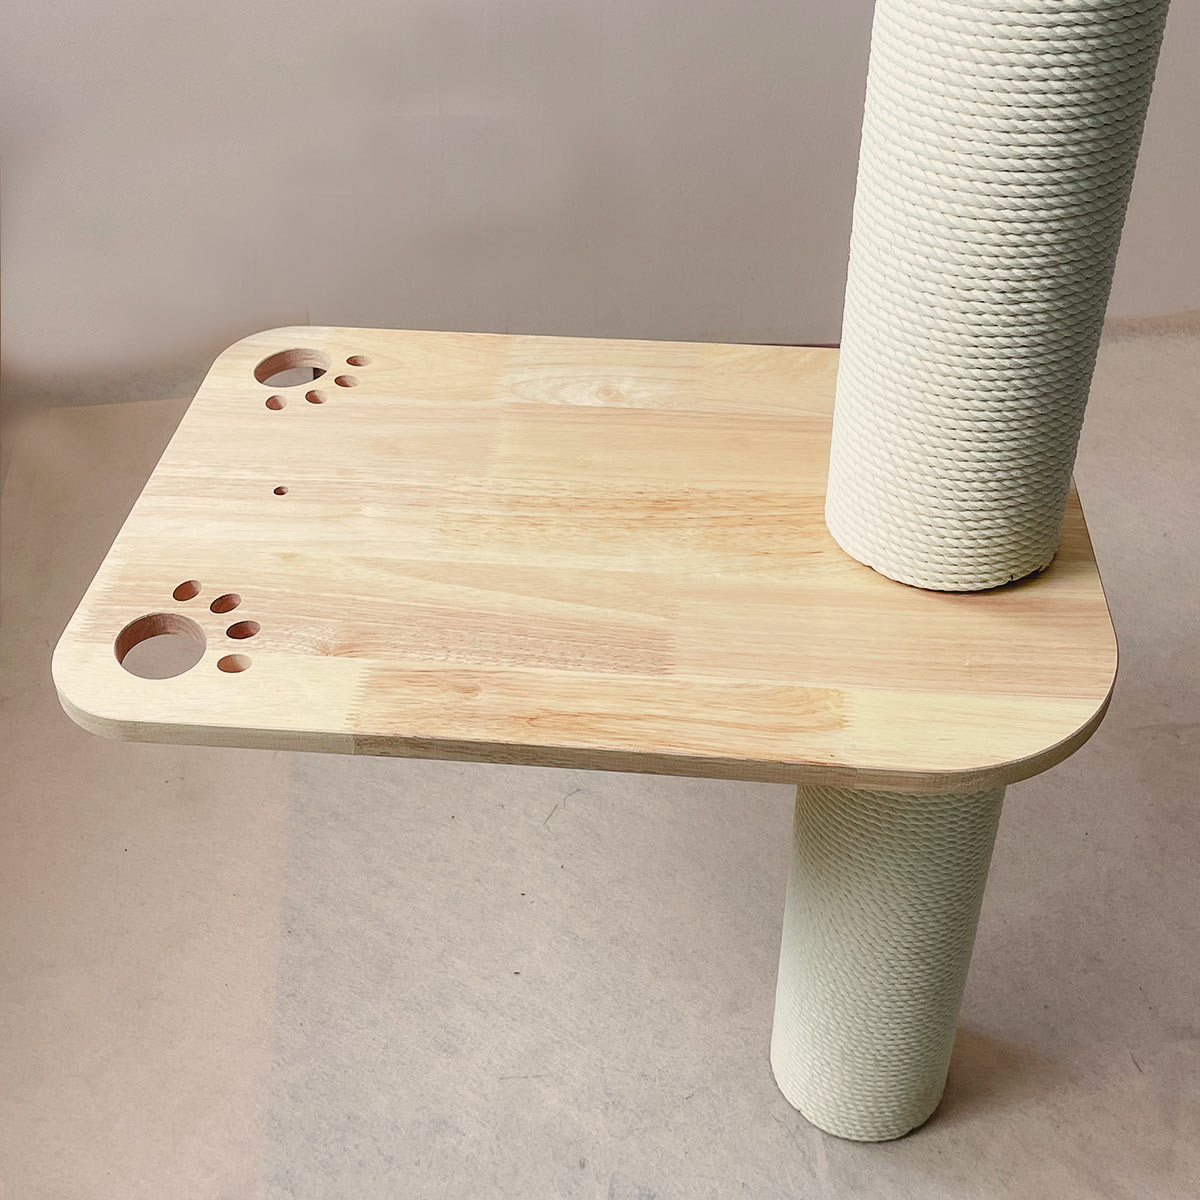 PETOMG Floor to Ceiling Cat Tower Accessories | Cat Steps | Rubberwood